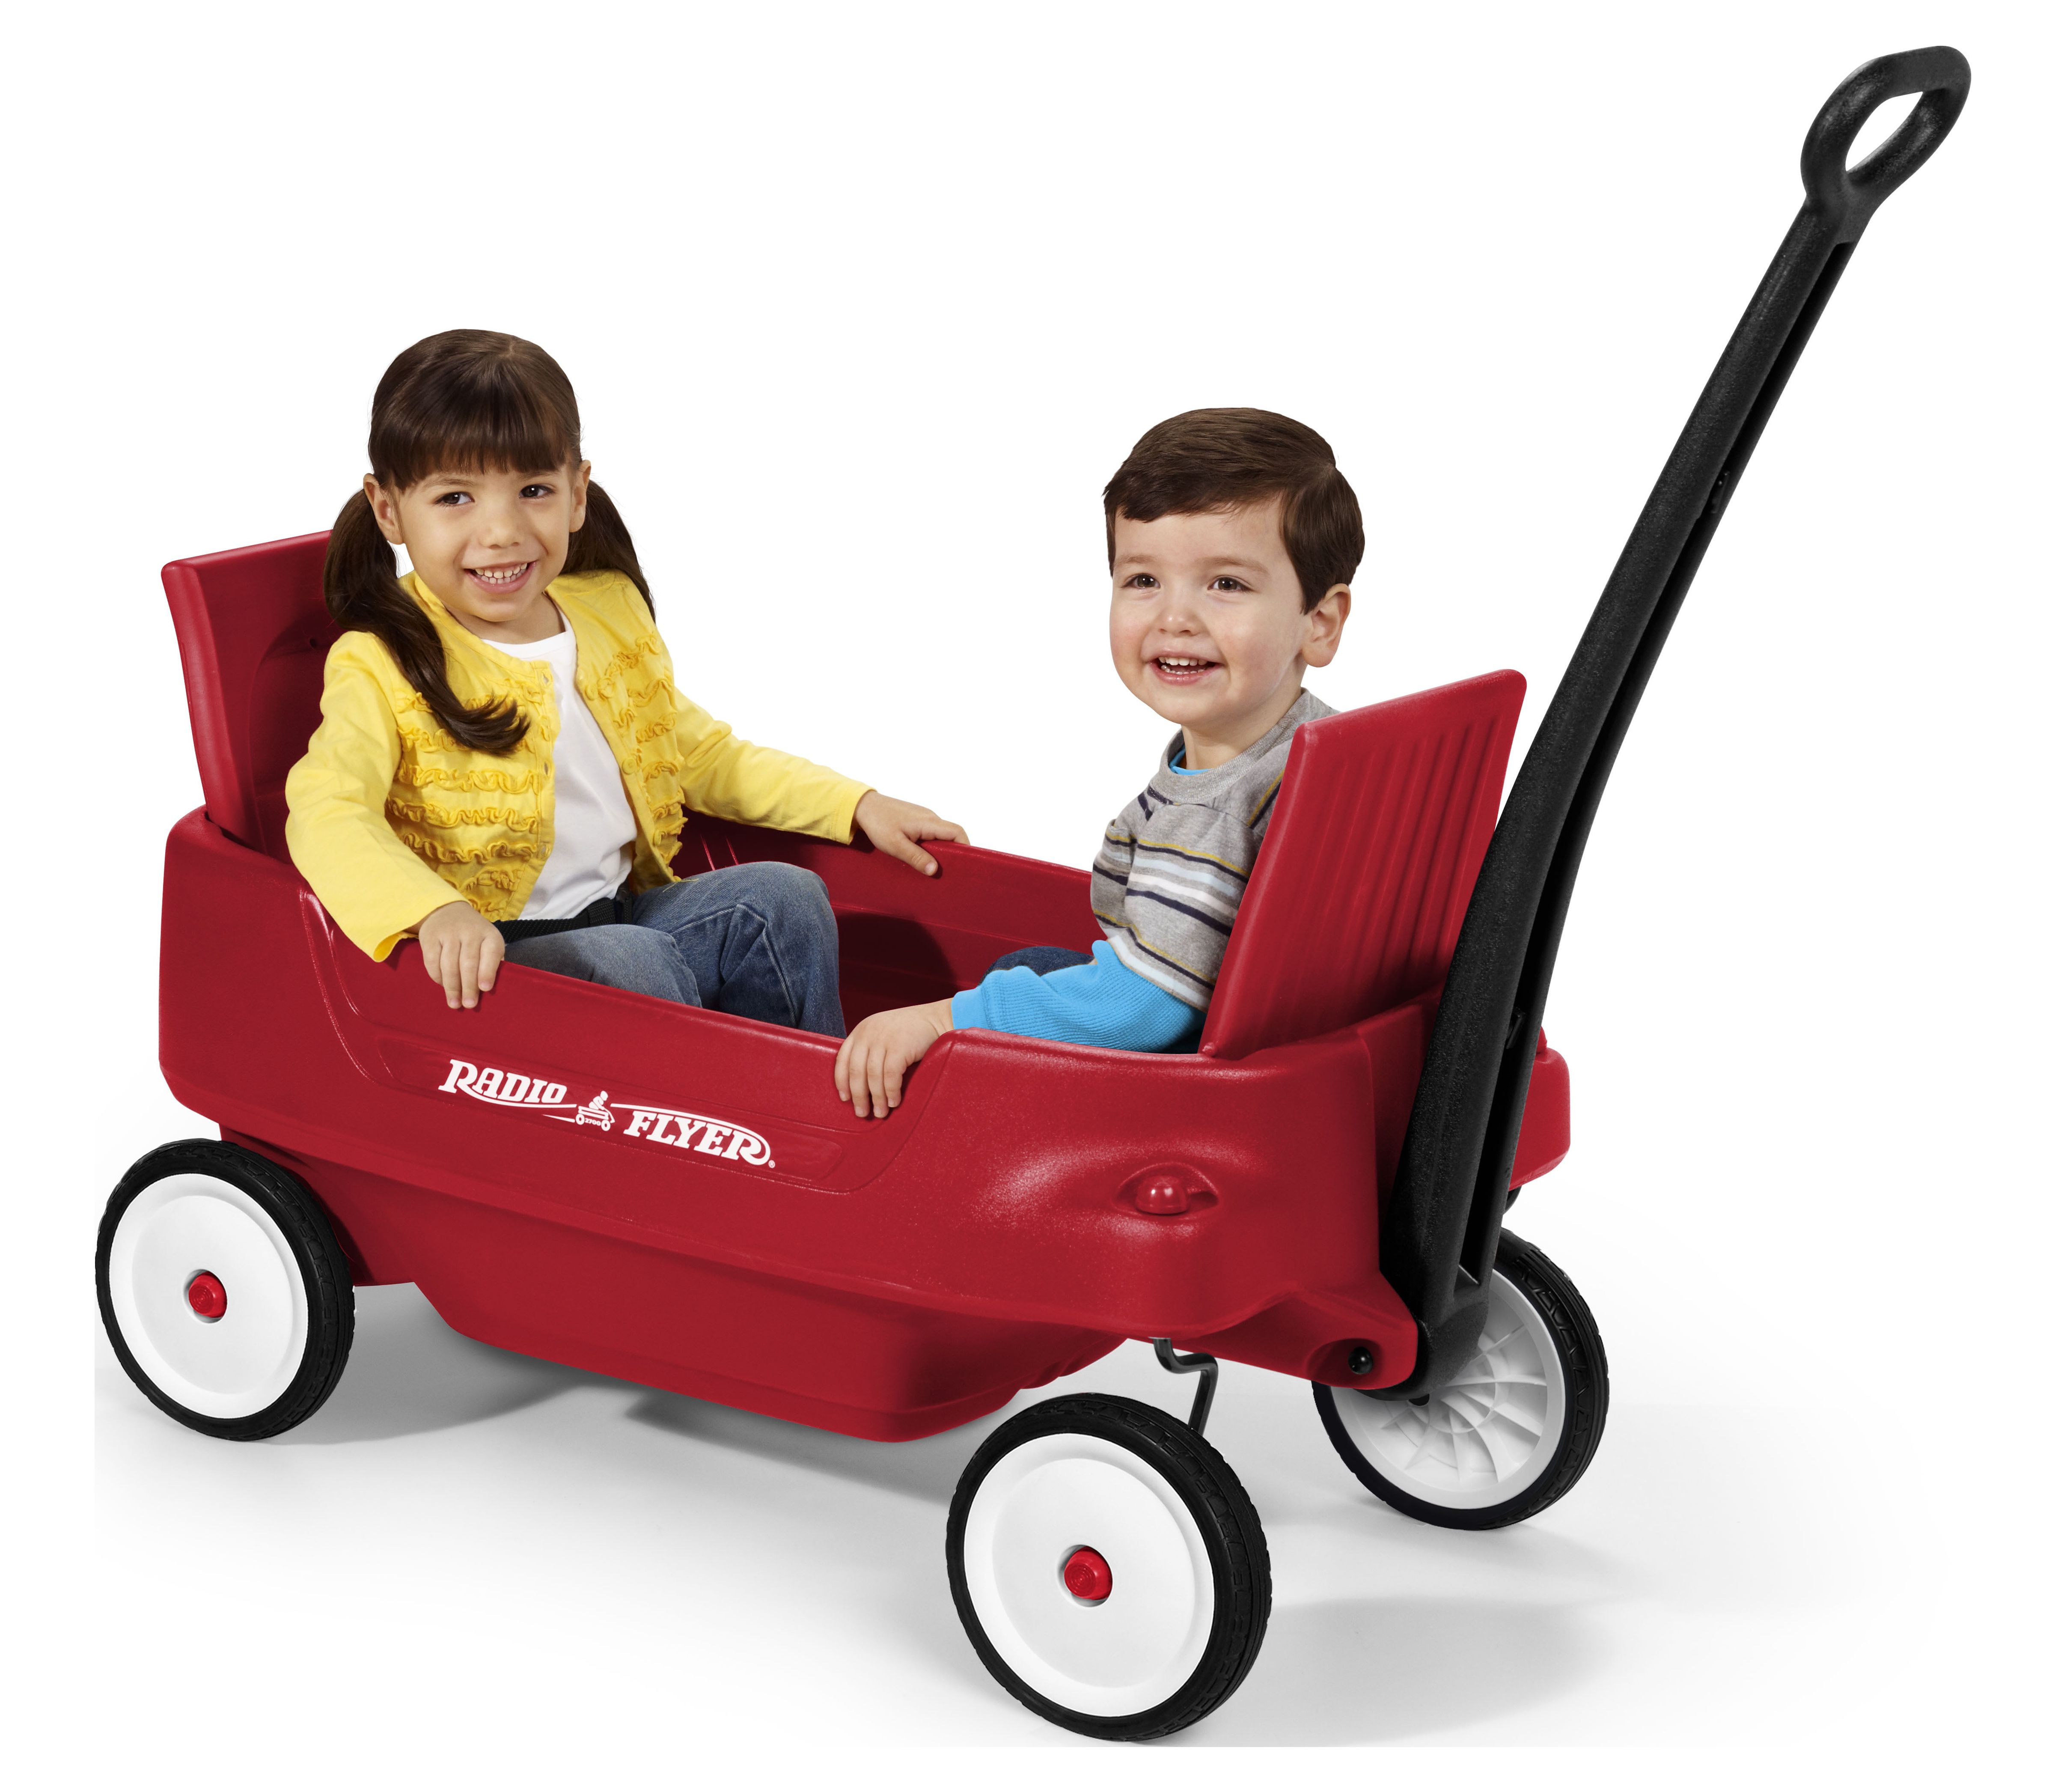 Radio Flyer, Pathfinder 2-in-1 Wagon, Folding Seats, Red - image 1 of 9